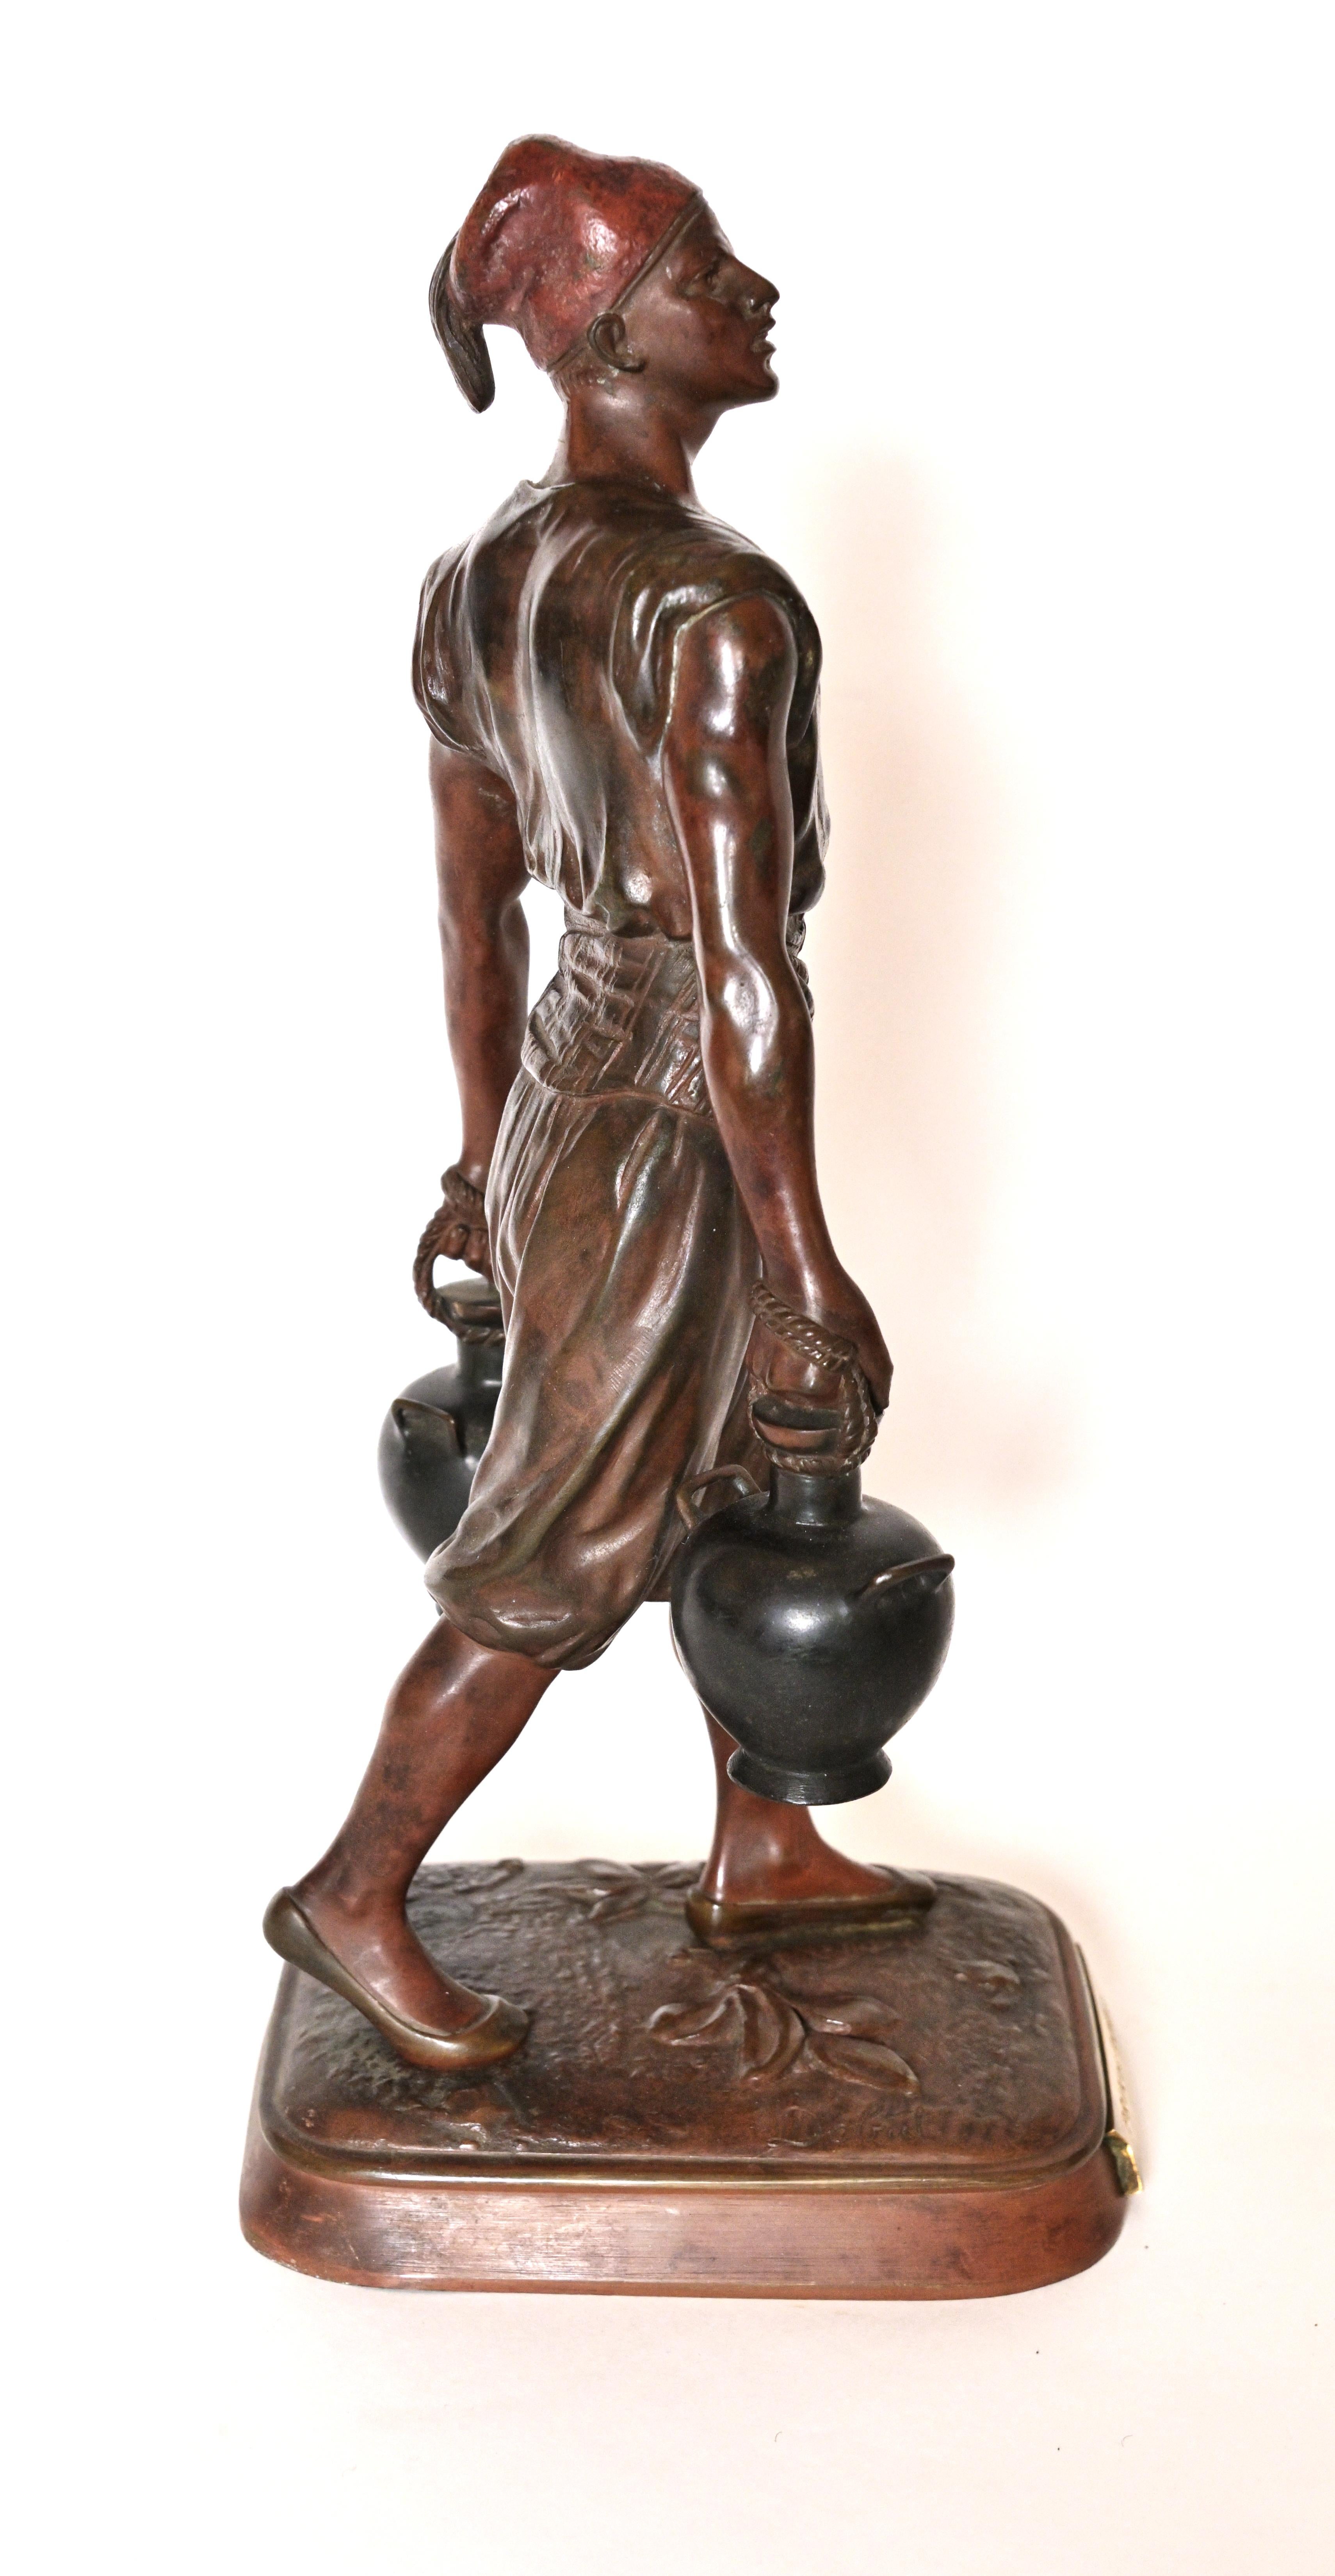 A 19th century French Bronze depicting a Moroccan Male wearing a fez and carrying two jugs of water. Base is labeled with 